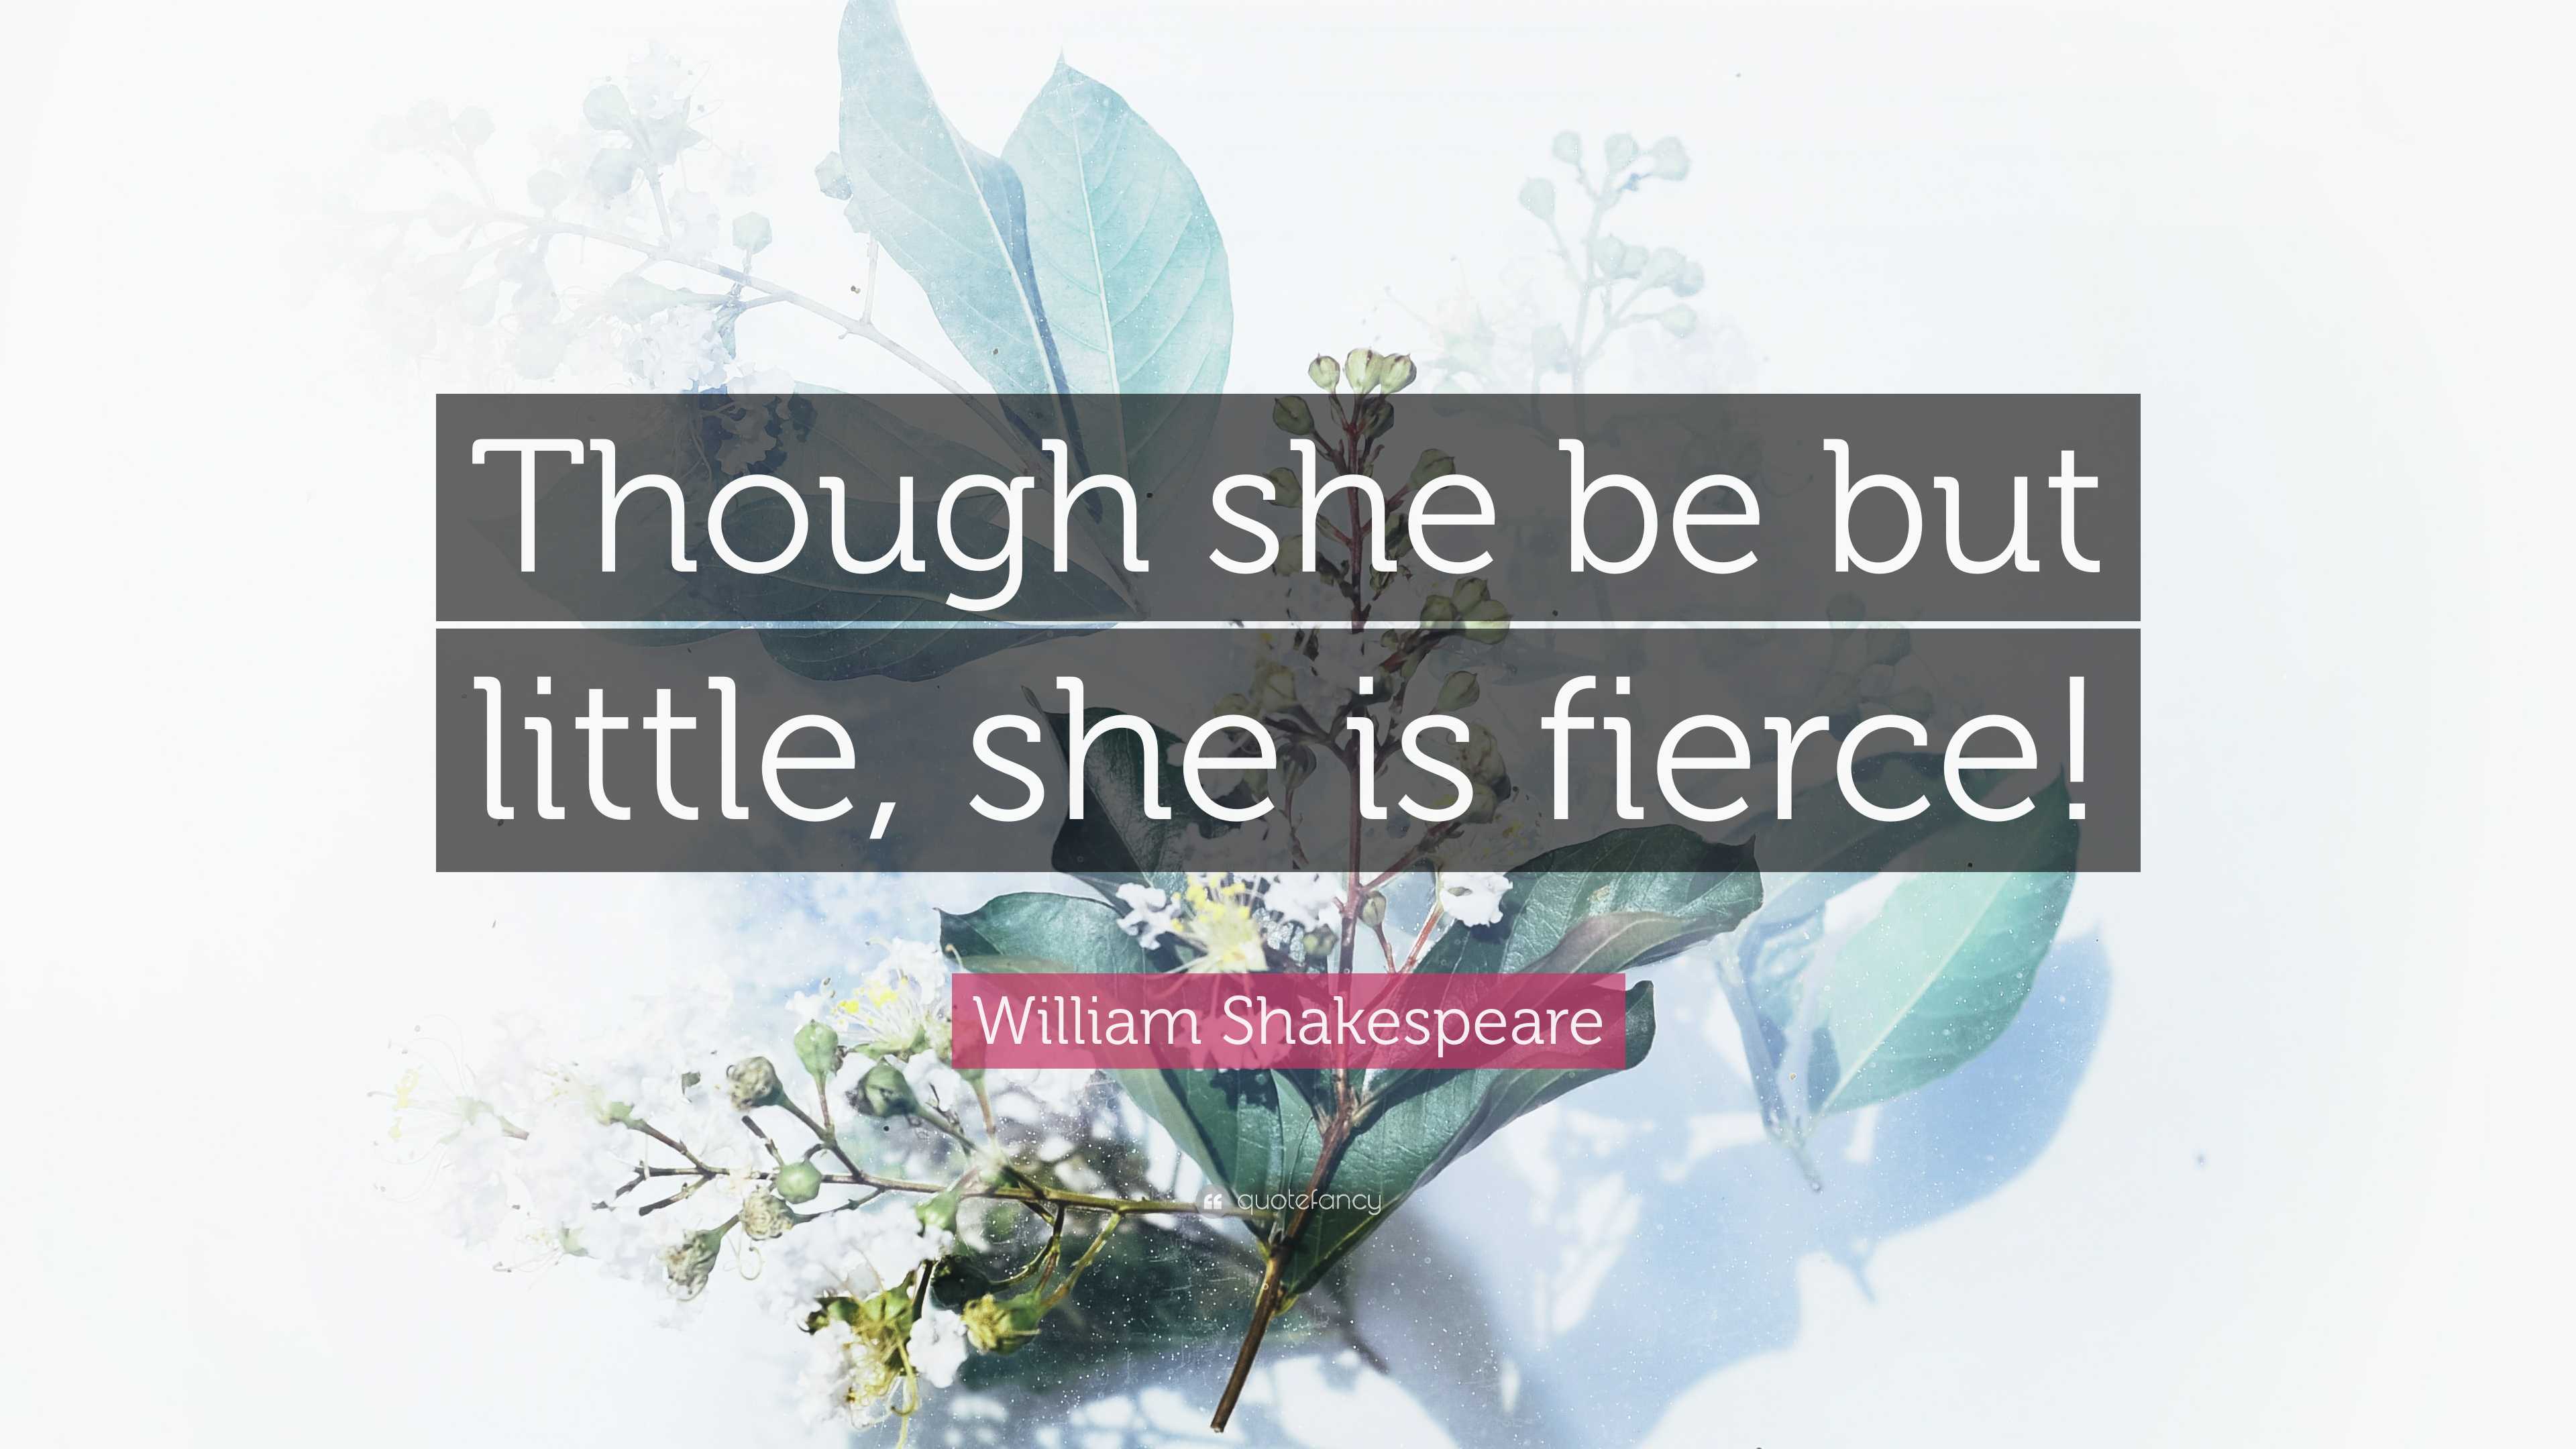 William Shakespeare Quote: “Though she be but little, she is fierce!”